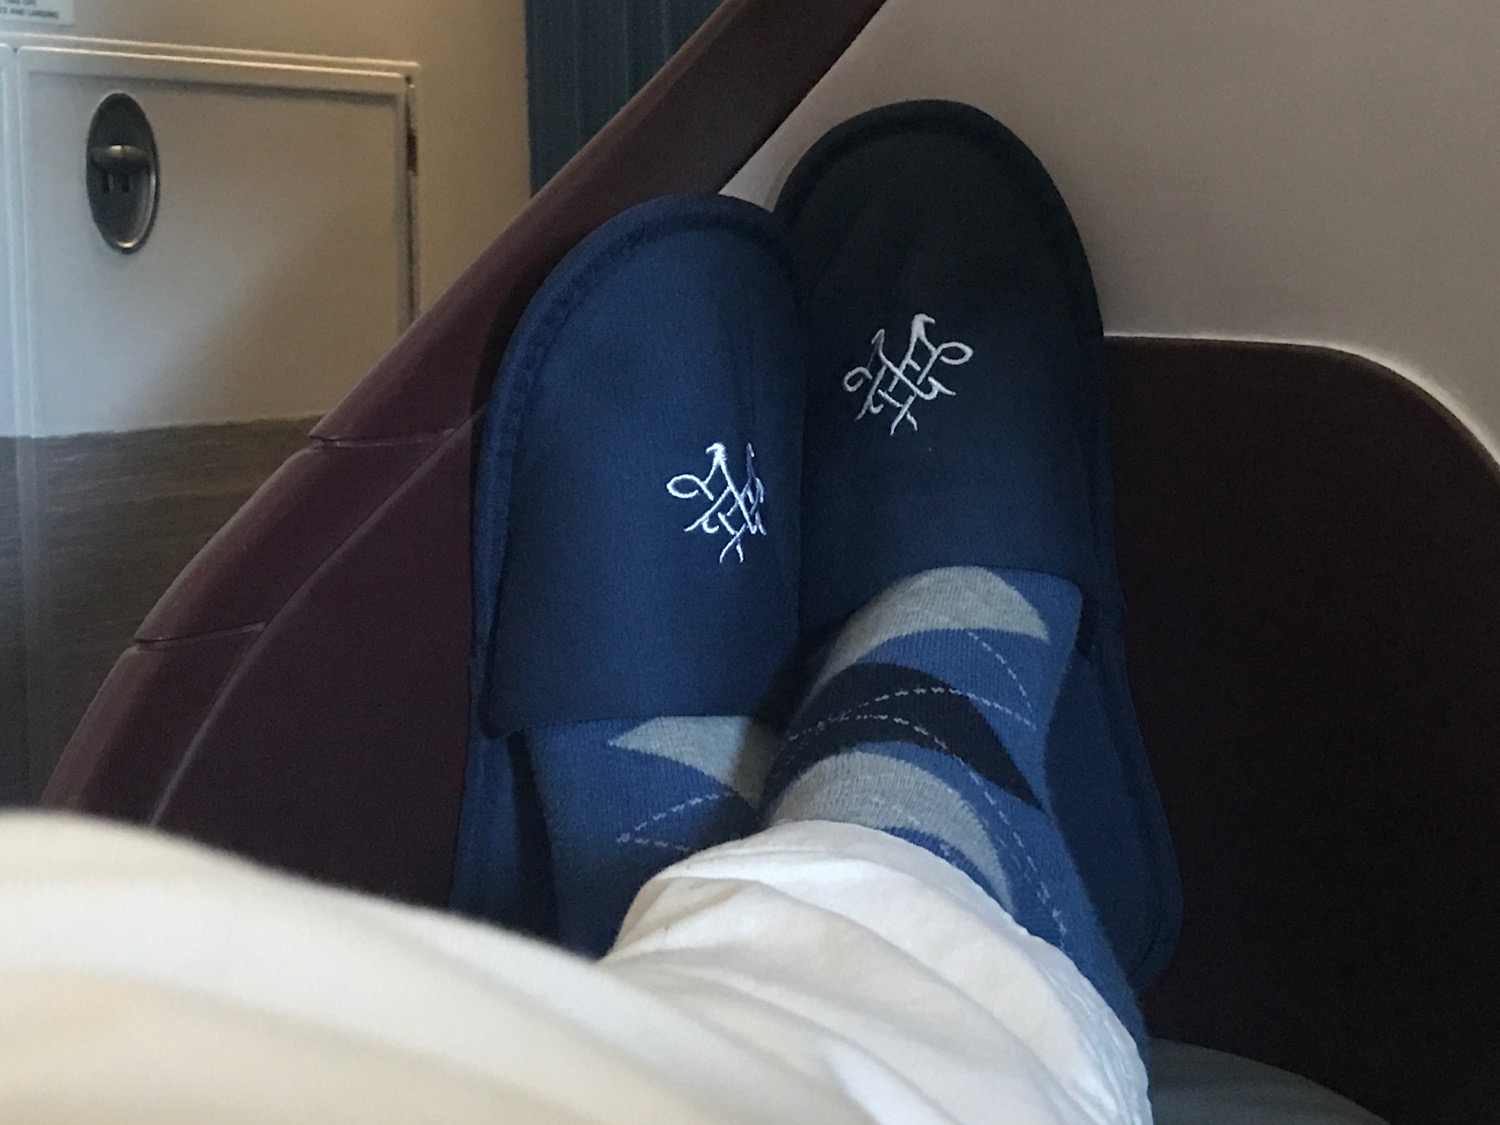 a person's feet wearing blue slippers